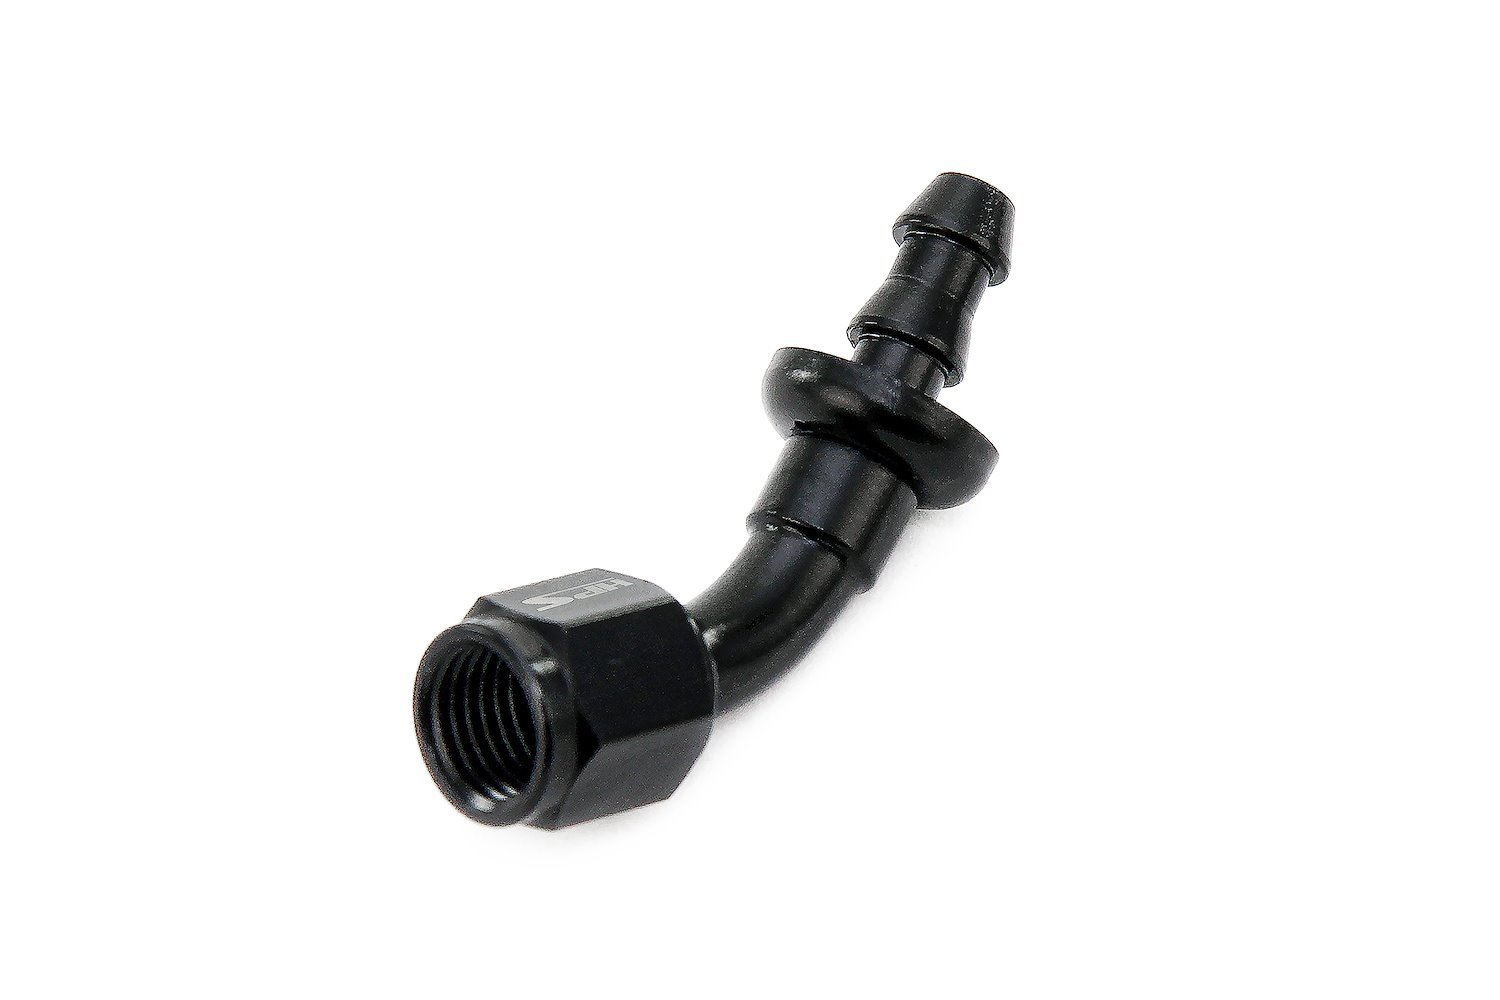 150-4506 150 Series 45-Deg Hose End, Tool-Free Assembly Hose Ends, For Push-On Style Hoses, Easy To Use